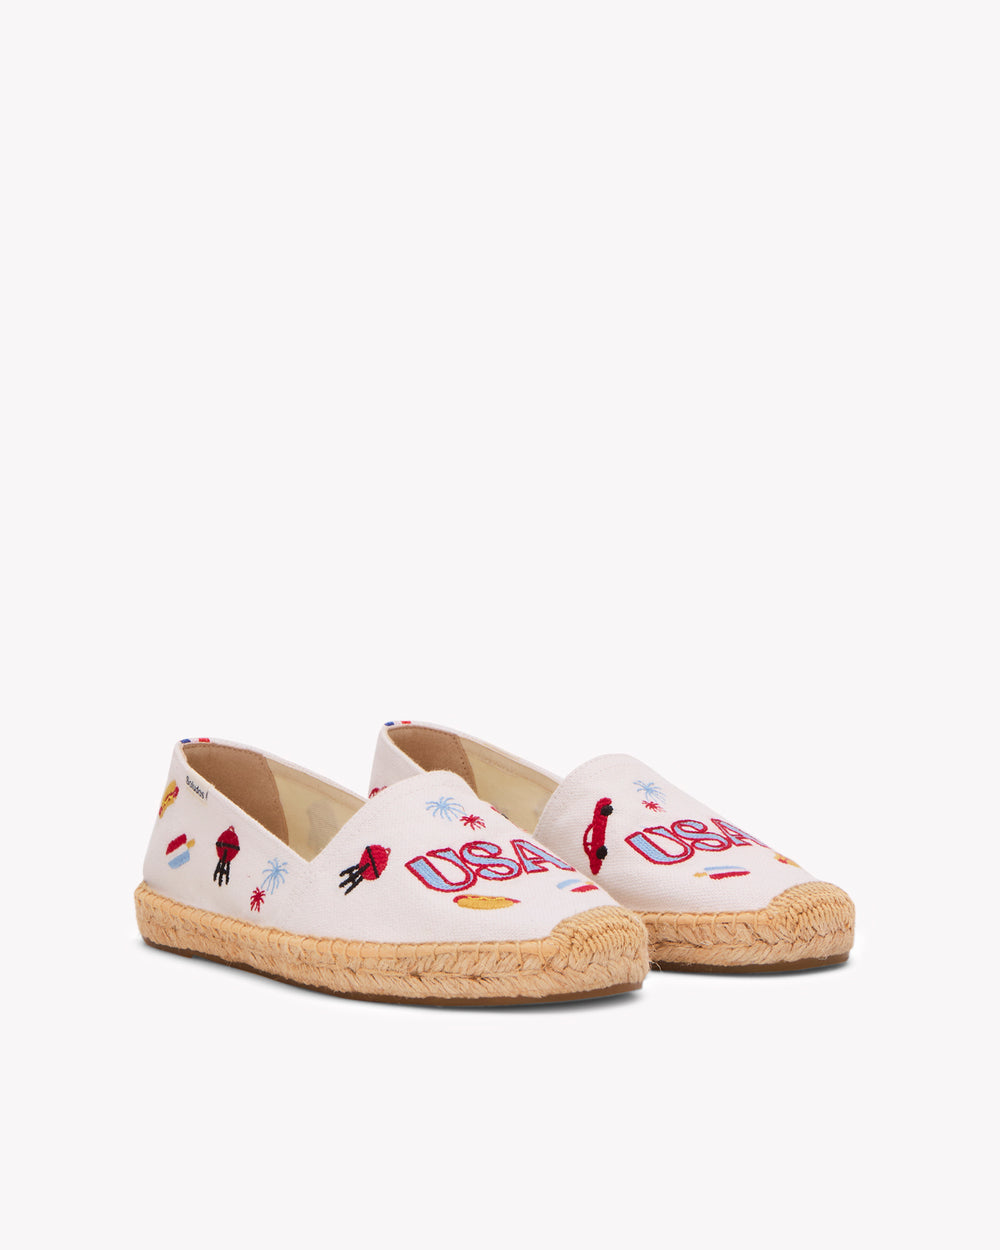 Angled front view of women's USA embroidery espadrille in white with colorful embroidery